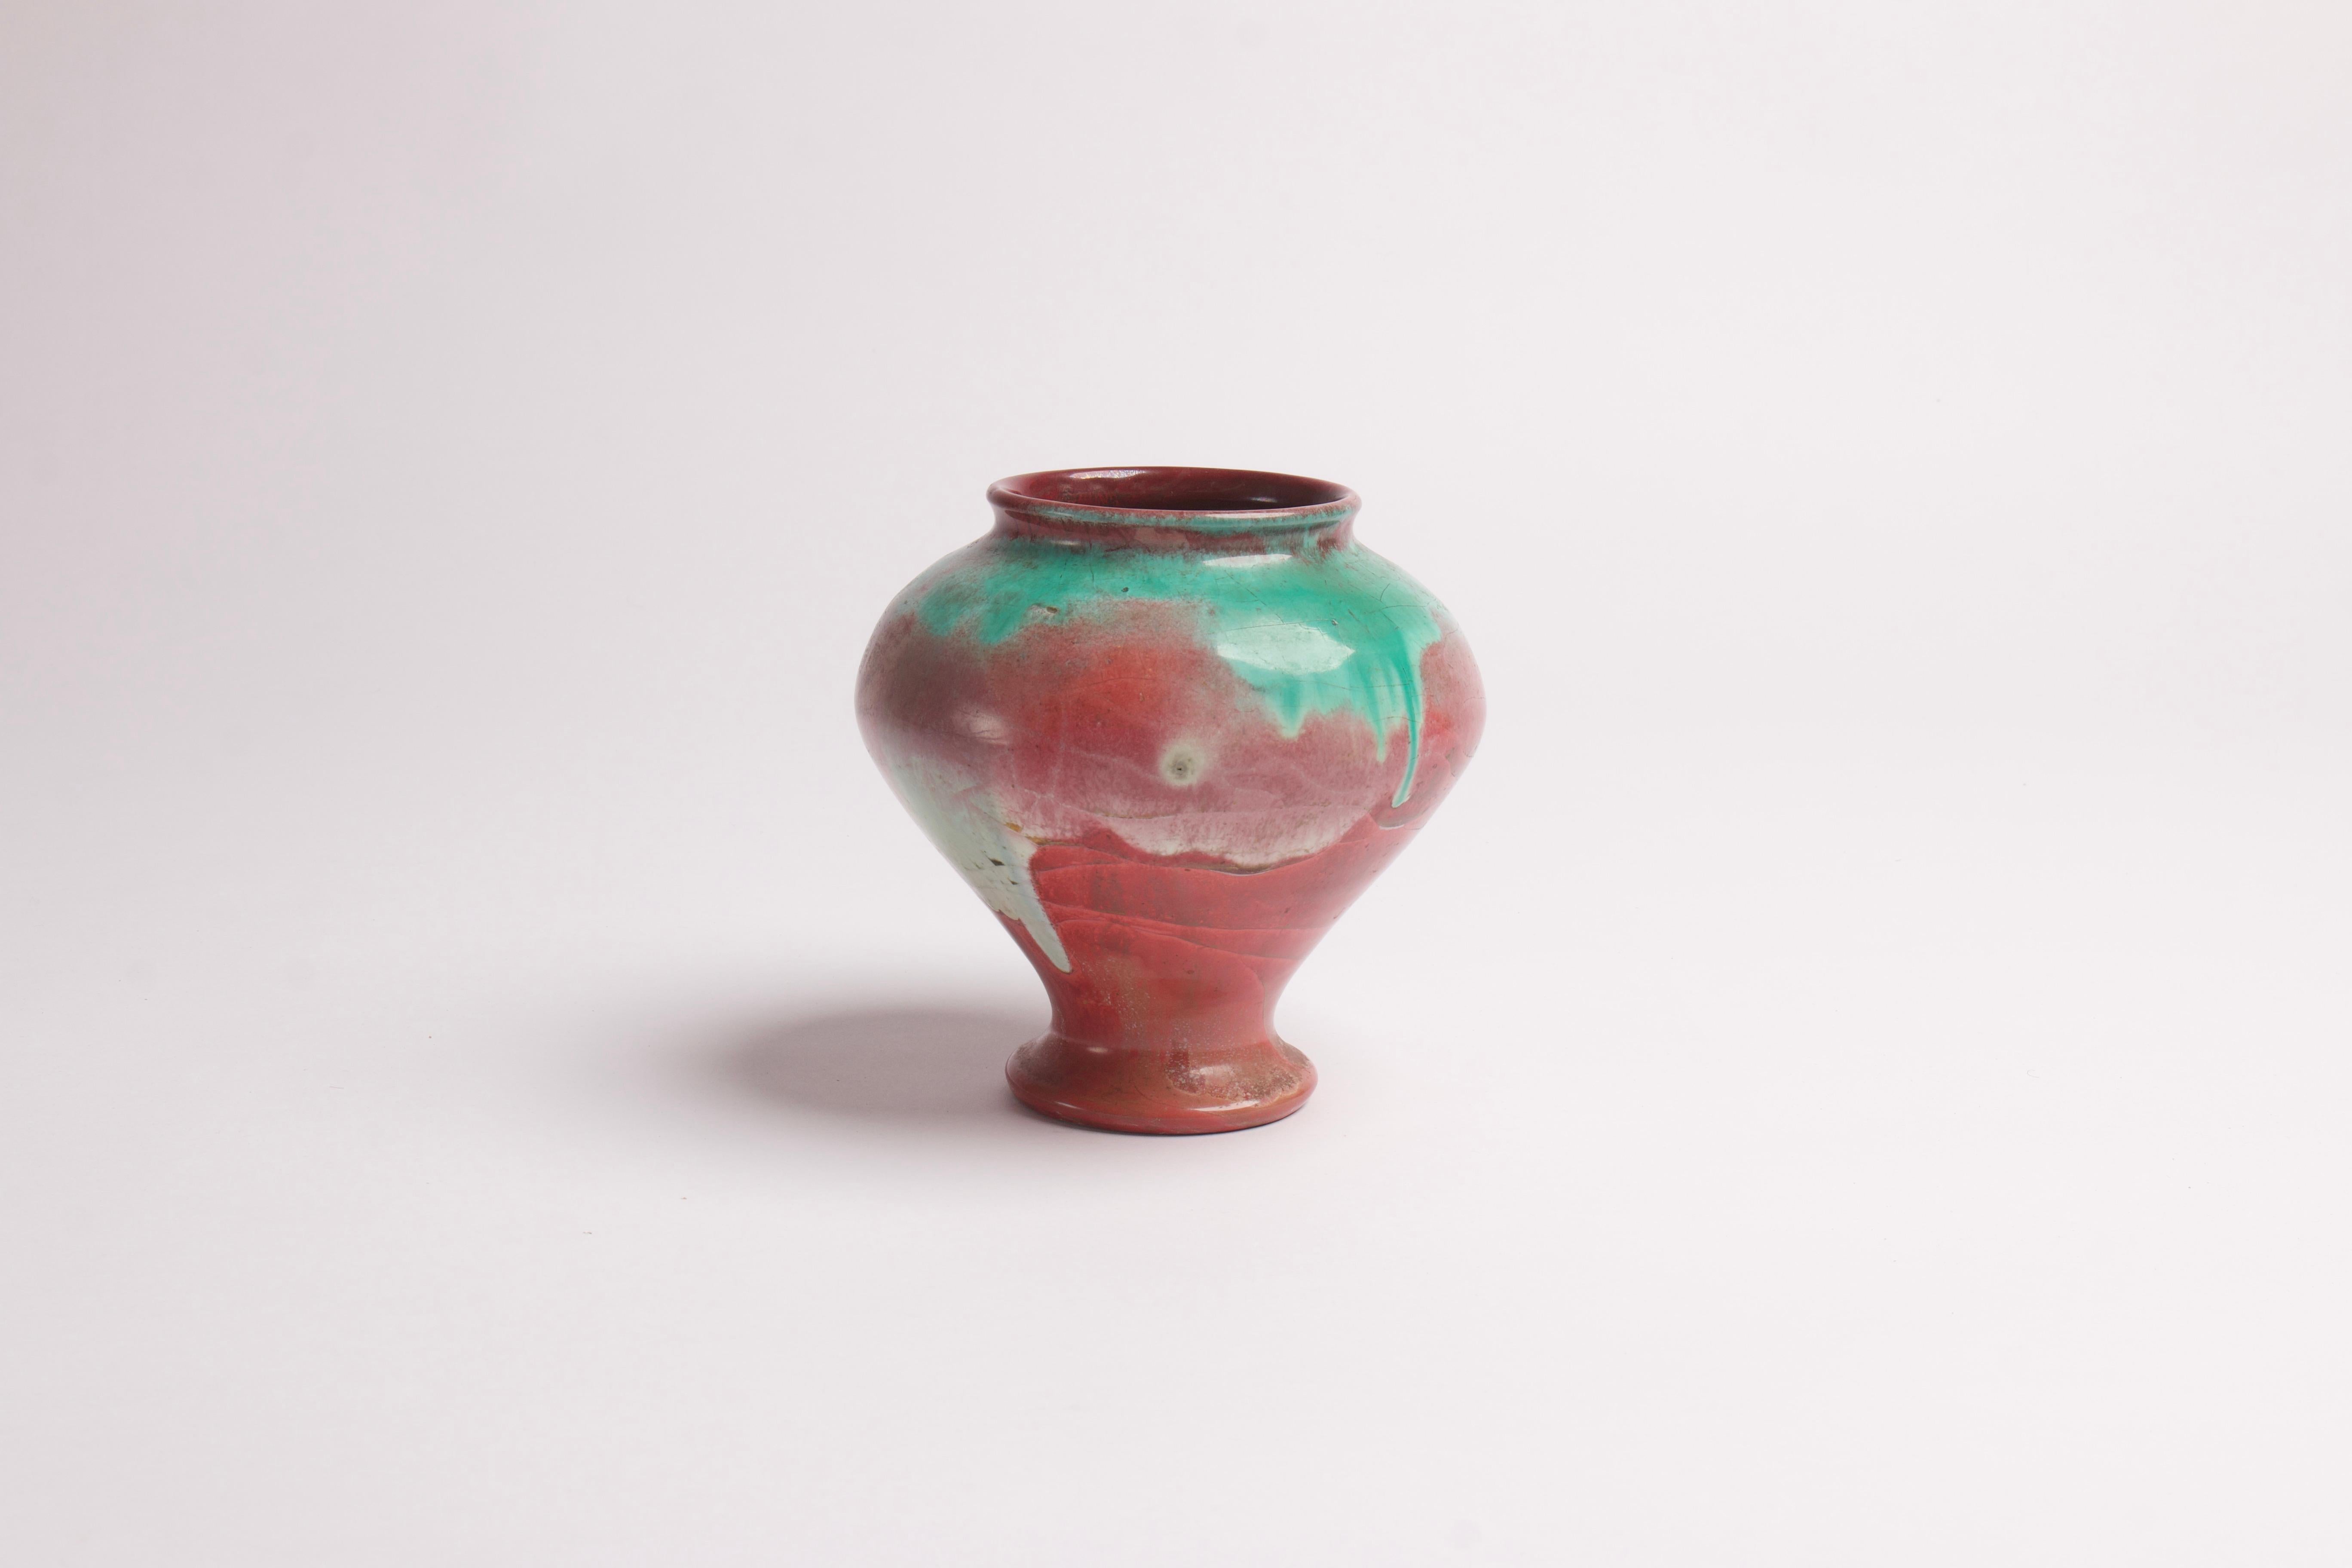 This elegant earthenware vase decorated with green and red luster glaze was executed by Herman A. Kähler, Denmark pottery ca. in the 1910s.

The vase has the ‘HAK’ monogram incised.